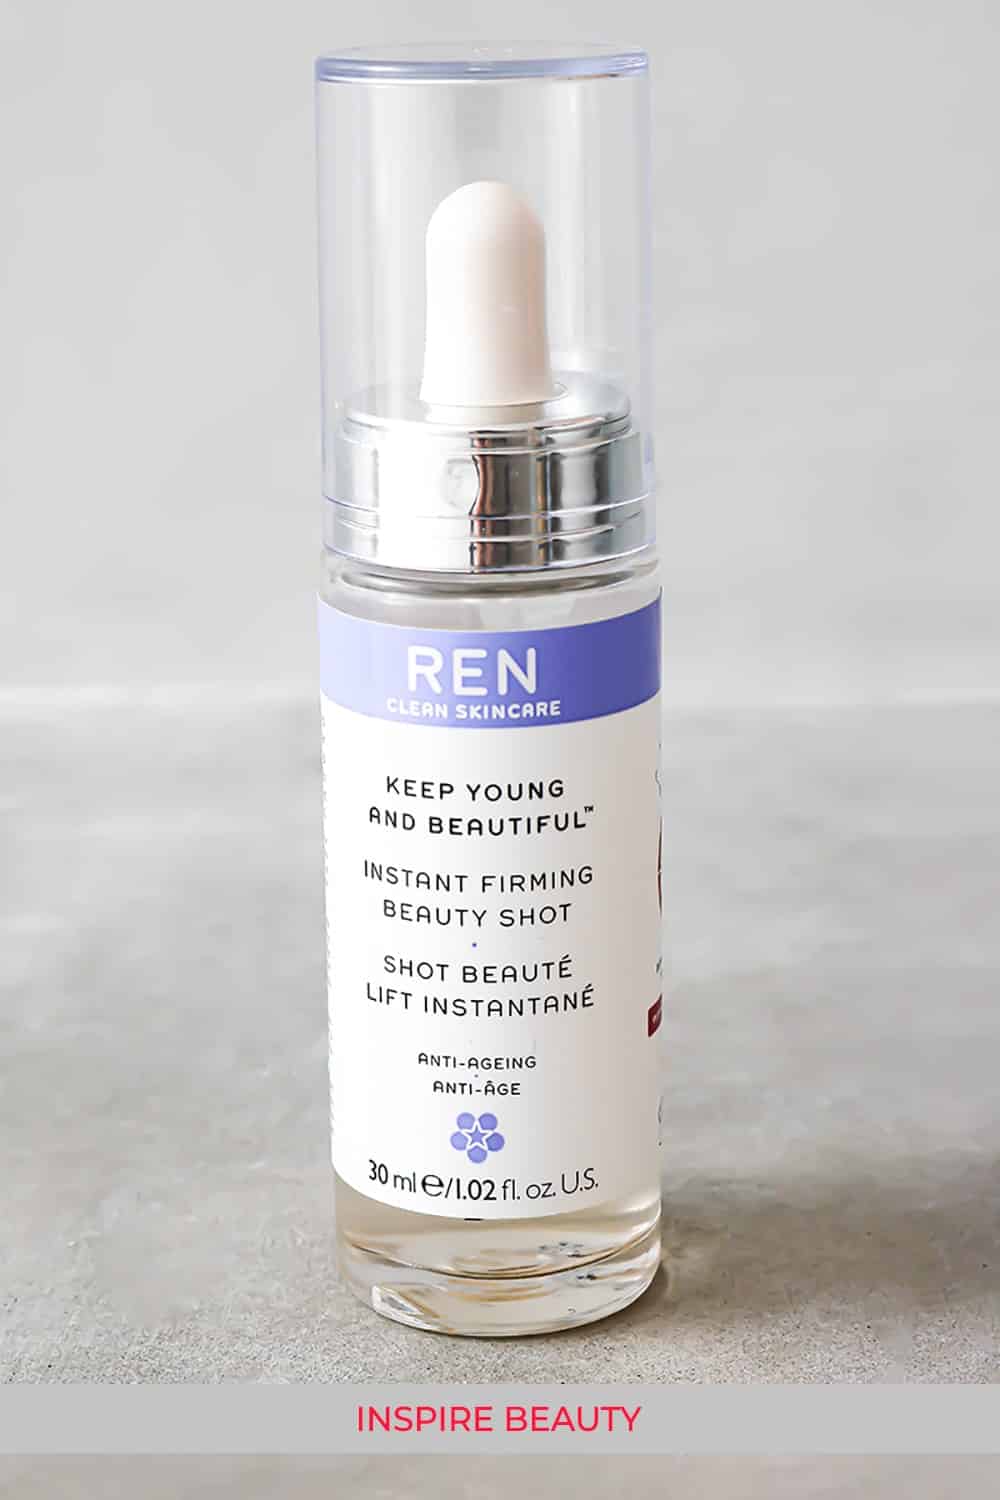 REN Instant Firming Beauty Shot review for firming and hydrating sagging and maturing skin